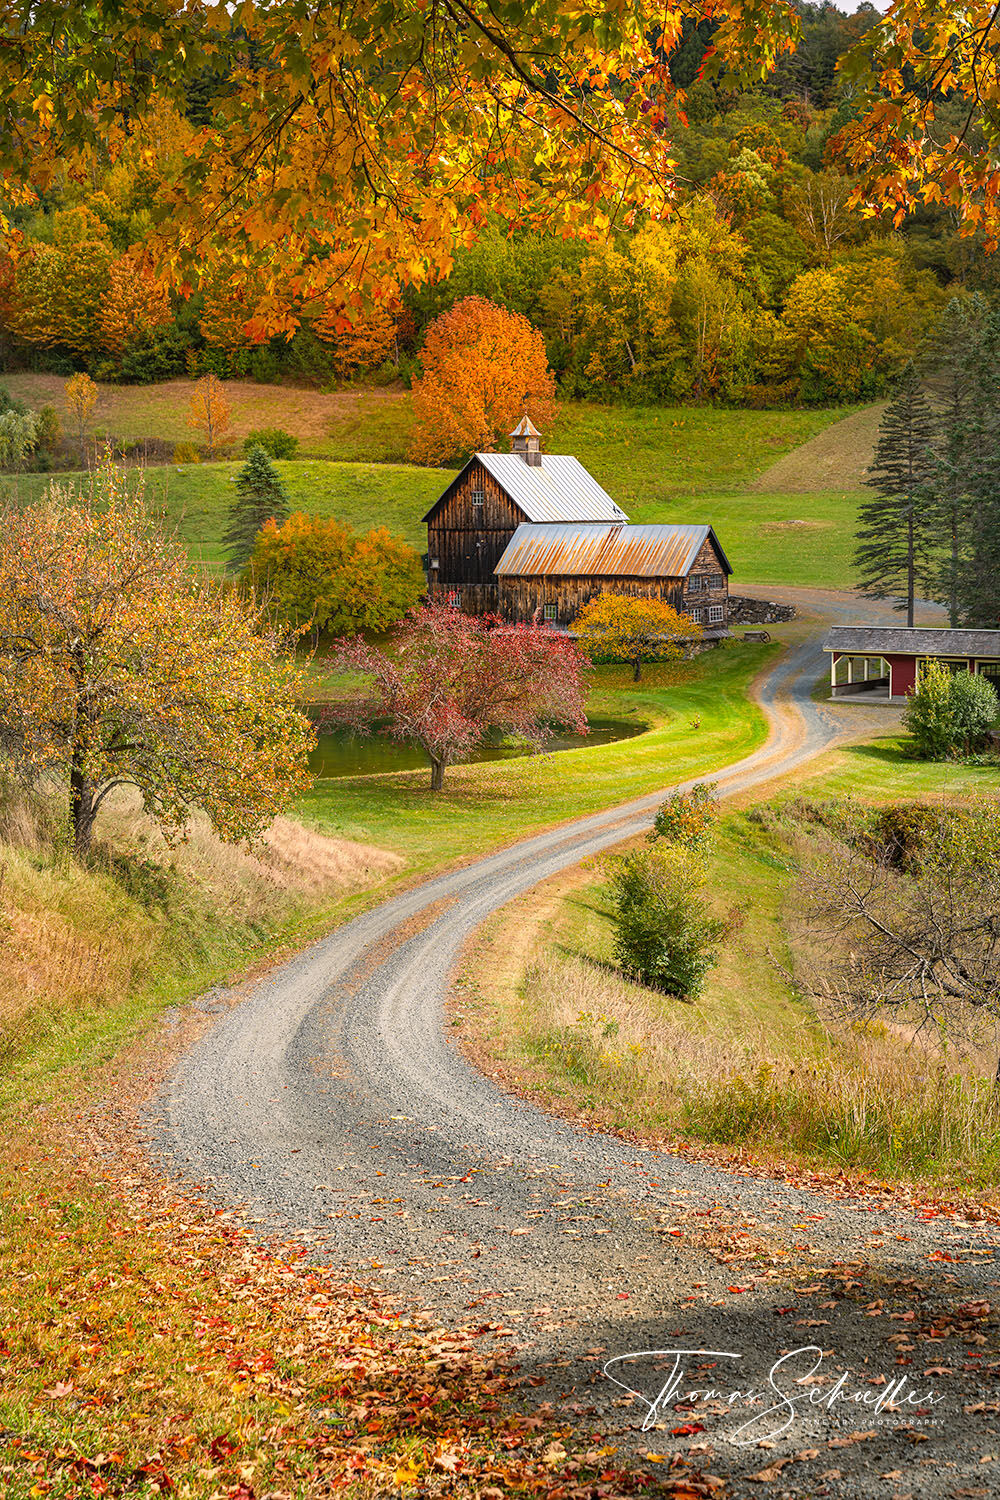 Woodstock Vermont's is the idyllic home of the picturesque Sleepy Hollow farm | Surrounded by vivid autumn colors - Fine Art Prints for sale 